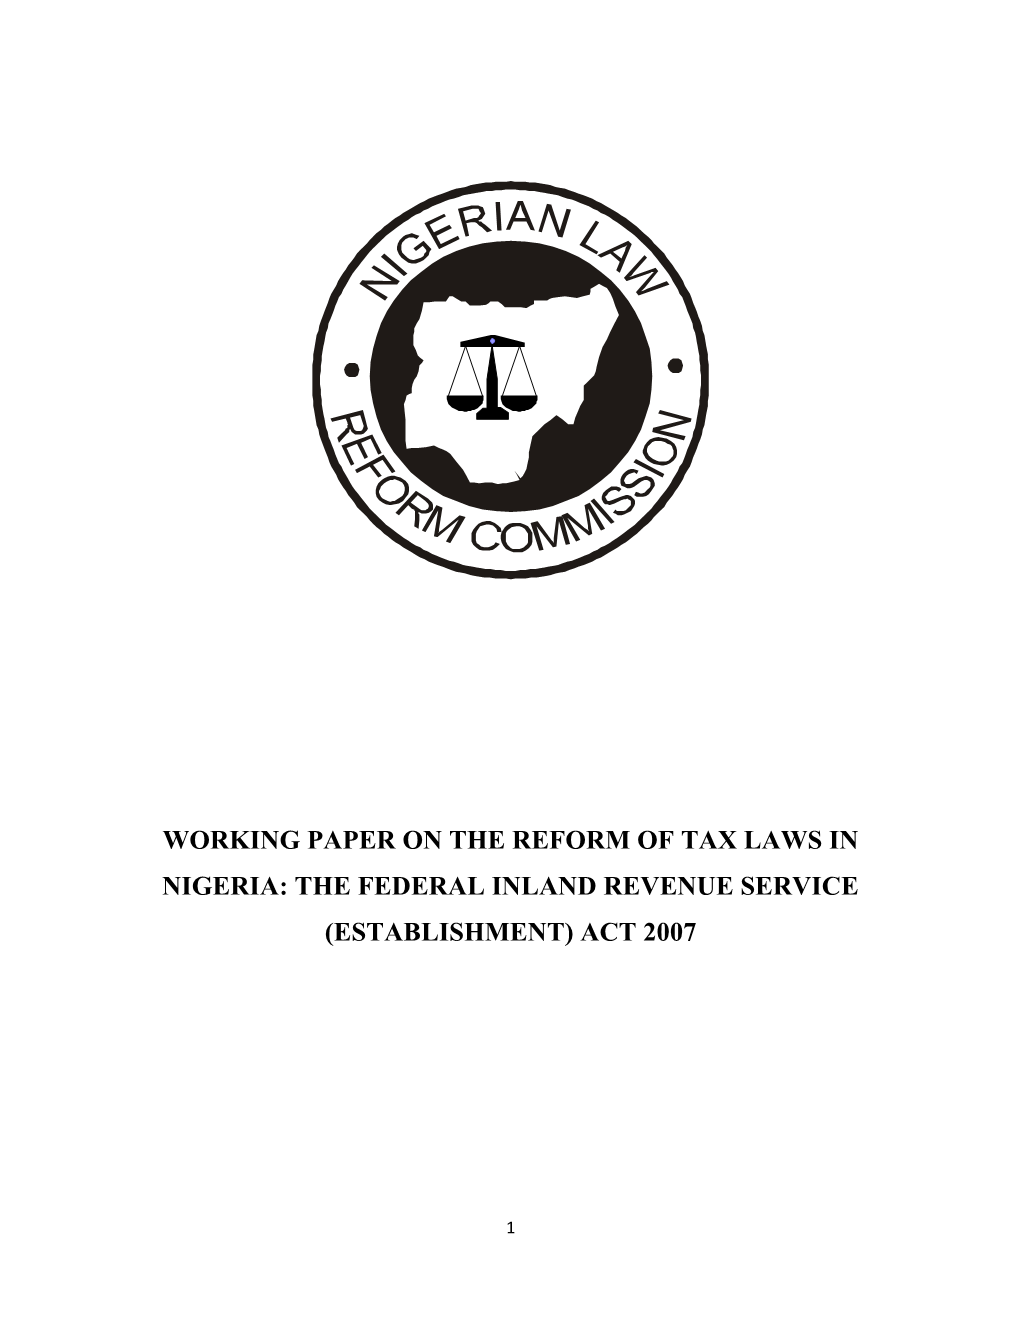 Working Paper on the Reform of Tax Laws in Nigeria: the Federal Inland Revenue Service